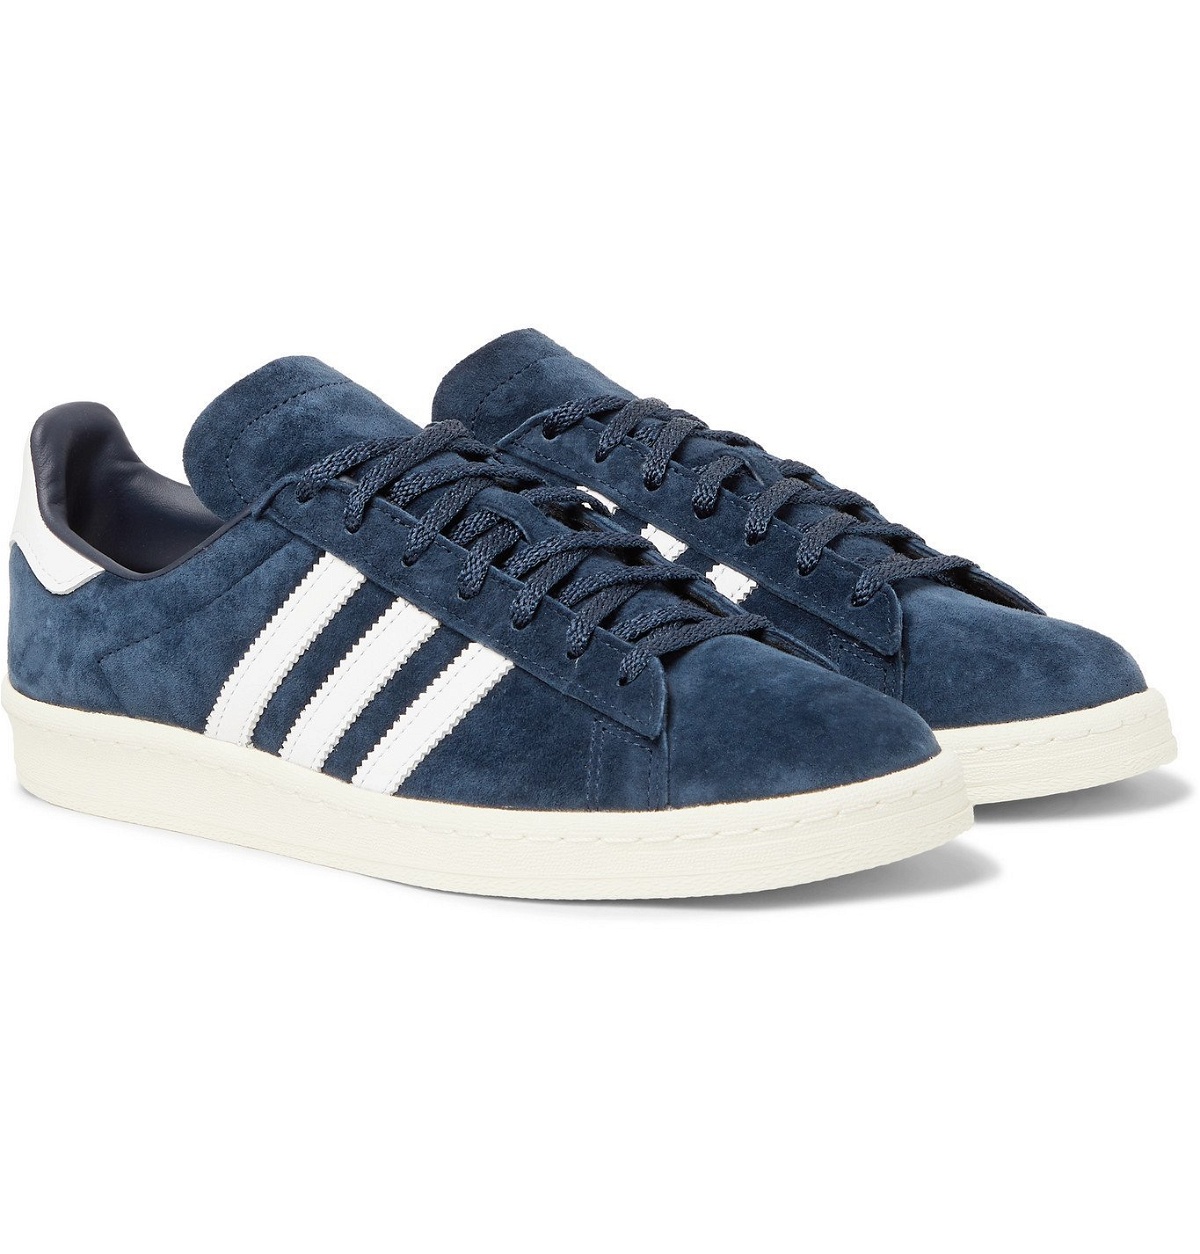 - Campus Leather-Trimmed Suede Sneakers - Blue adidas Originals